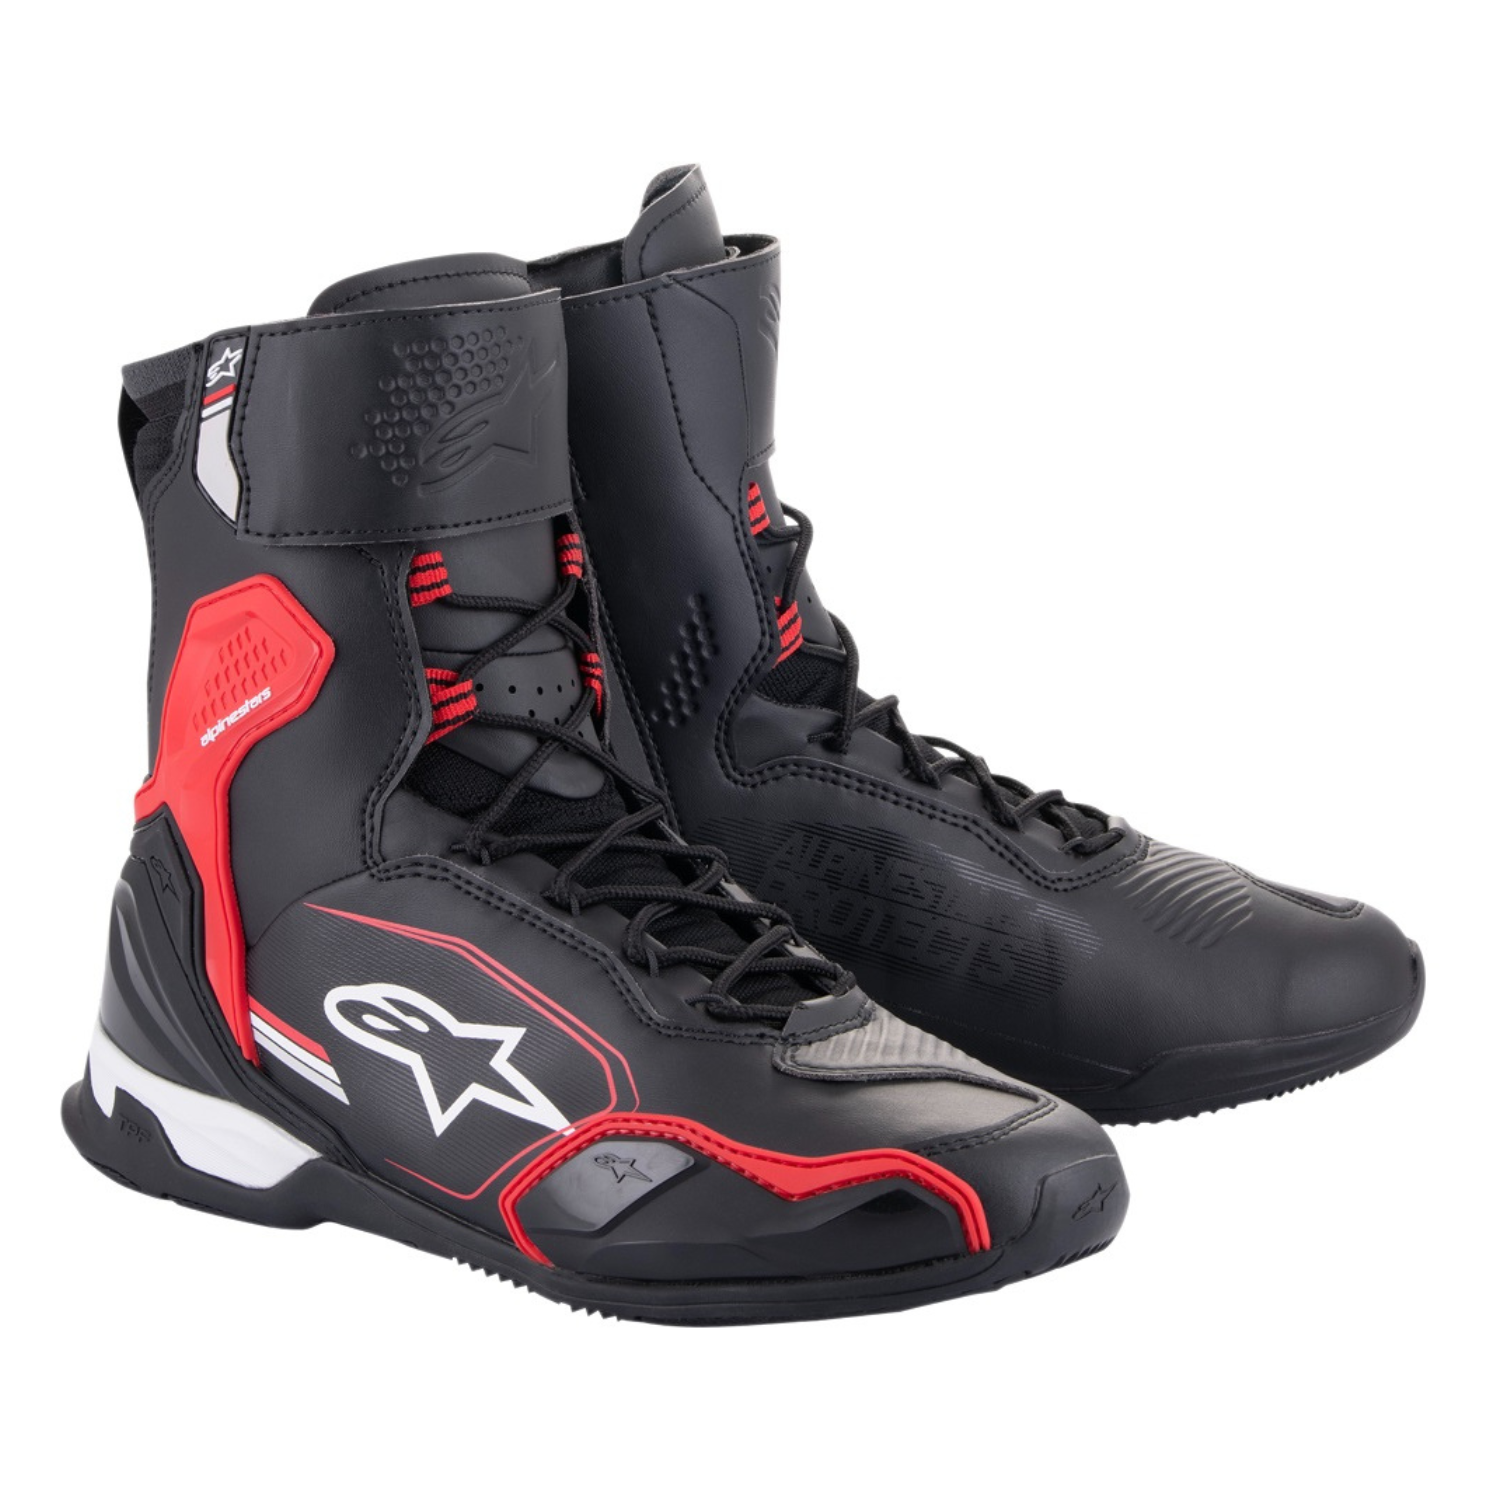 Image of Alpinestars Superfaster Shoes Black Bright Red White Size US 11 ID 8059347260990